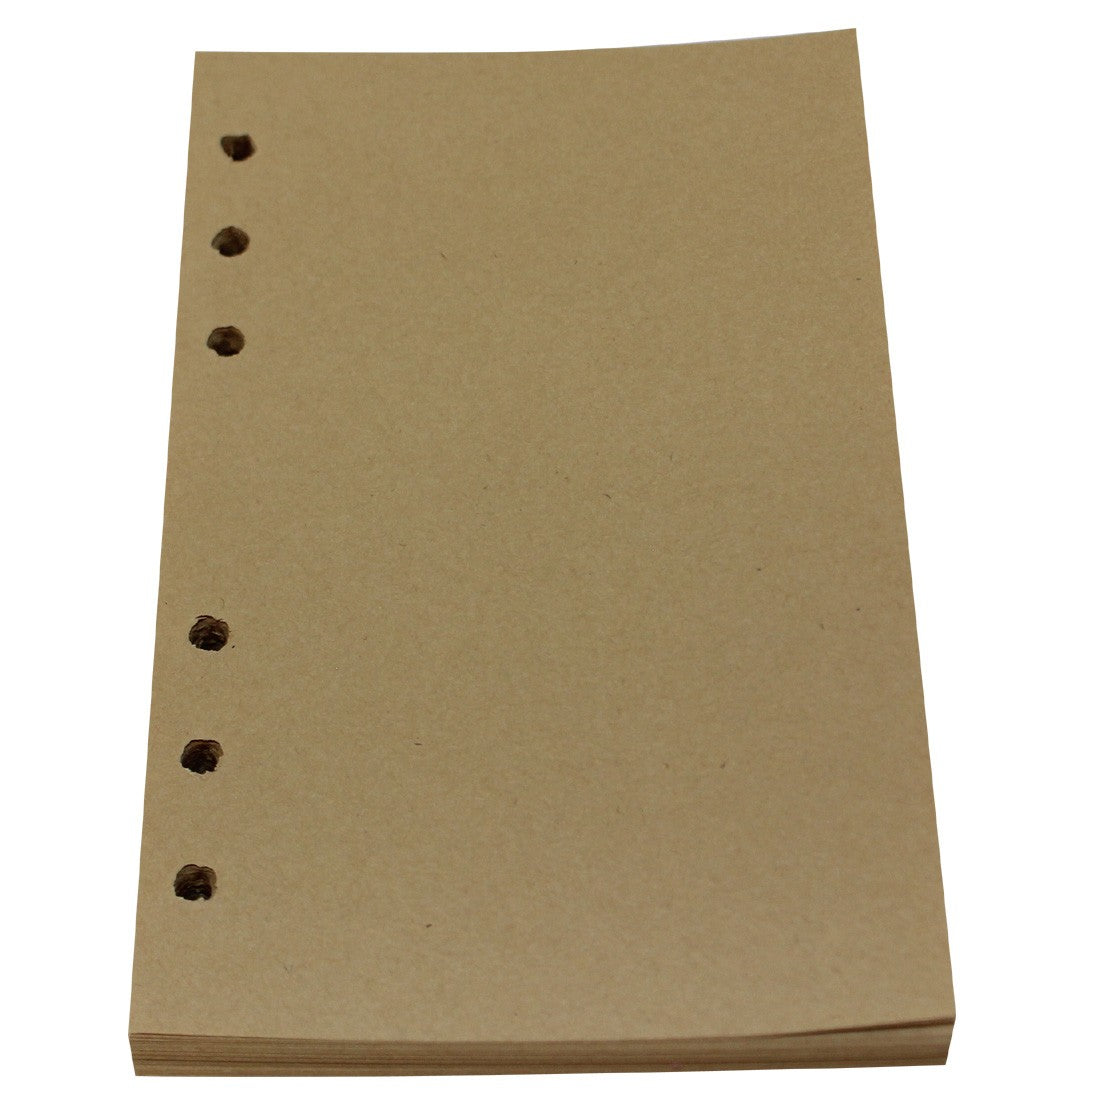 Replacement Inserts for Leatherette Journals - Original Source